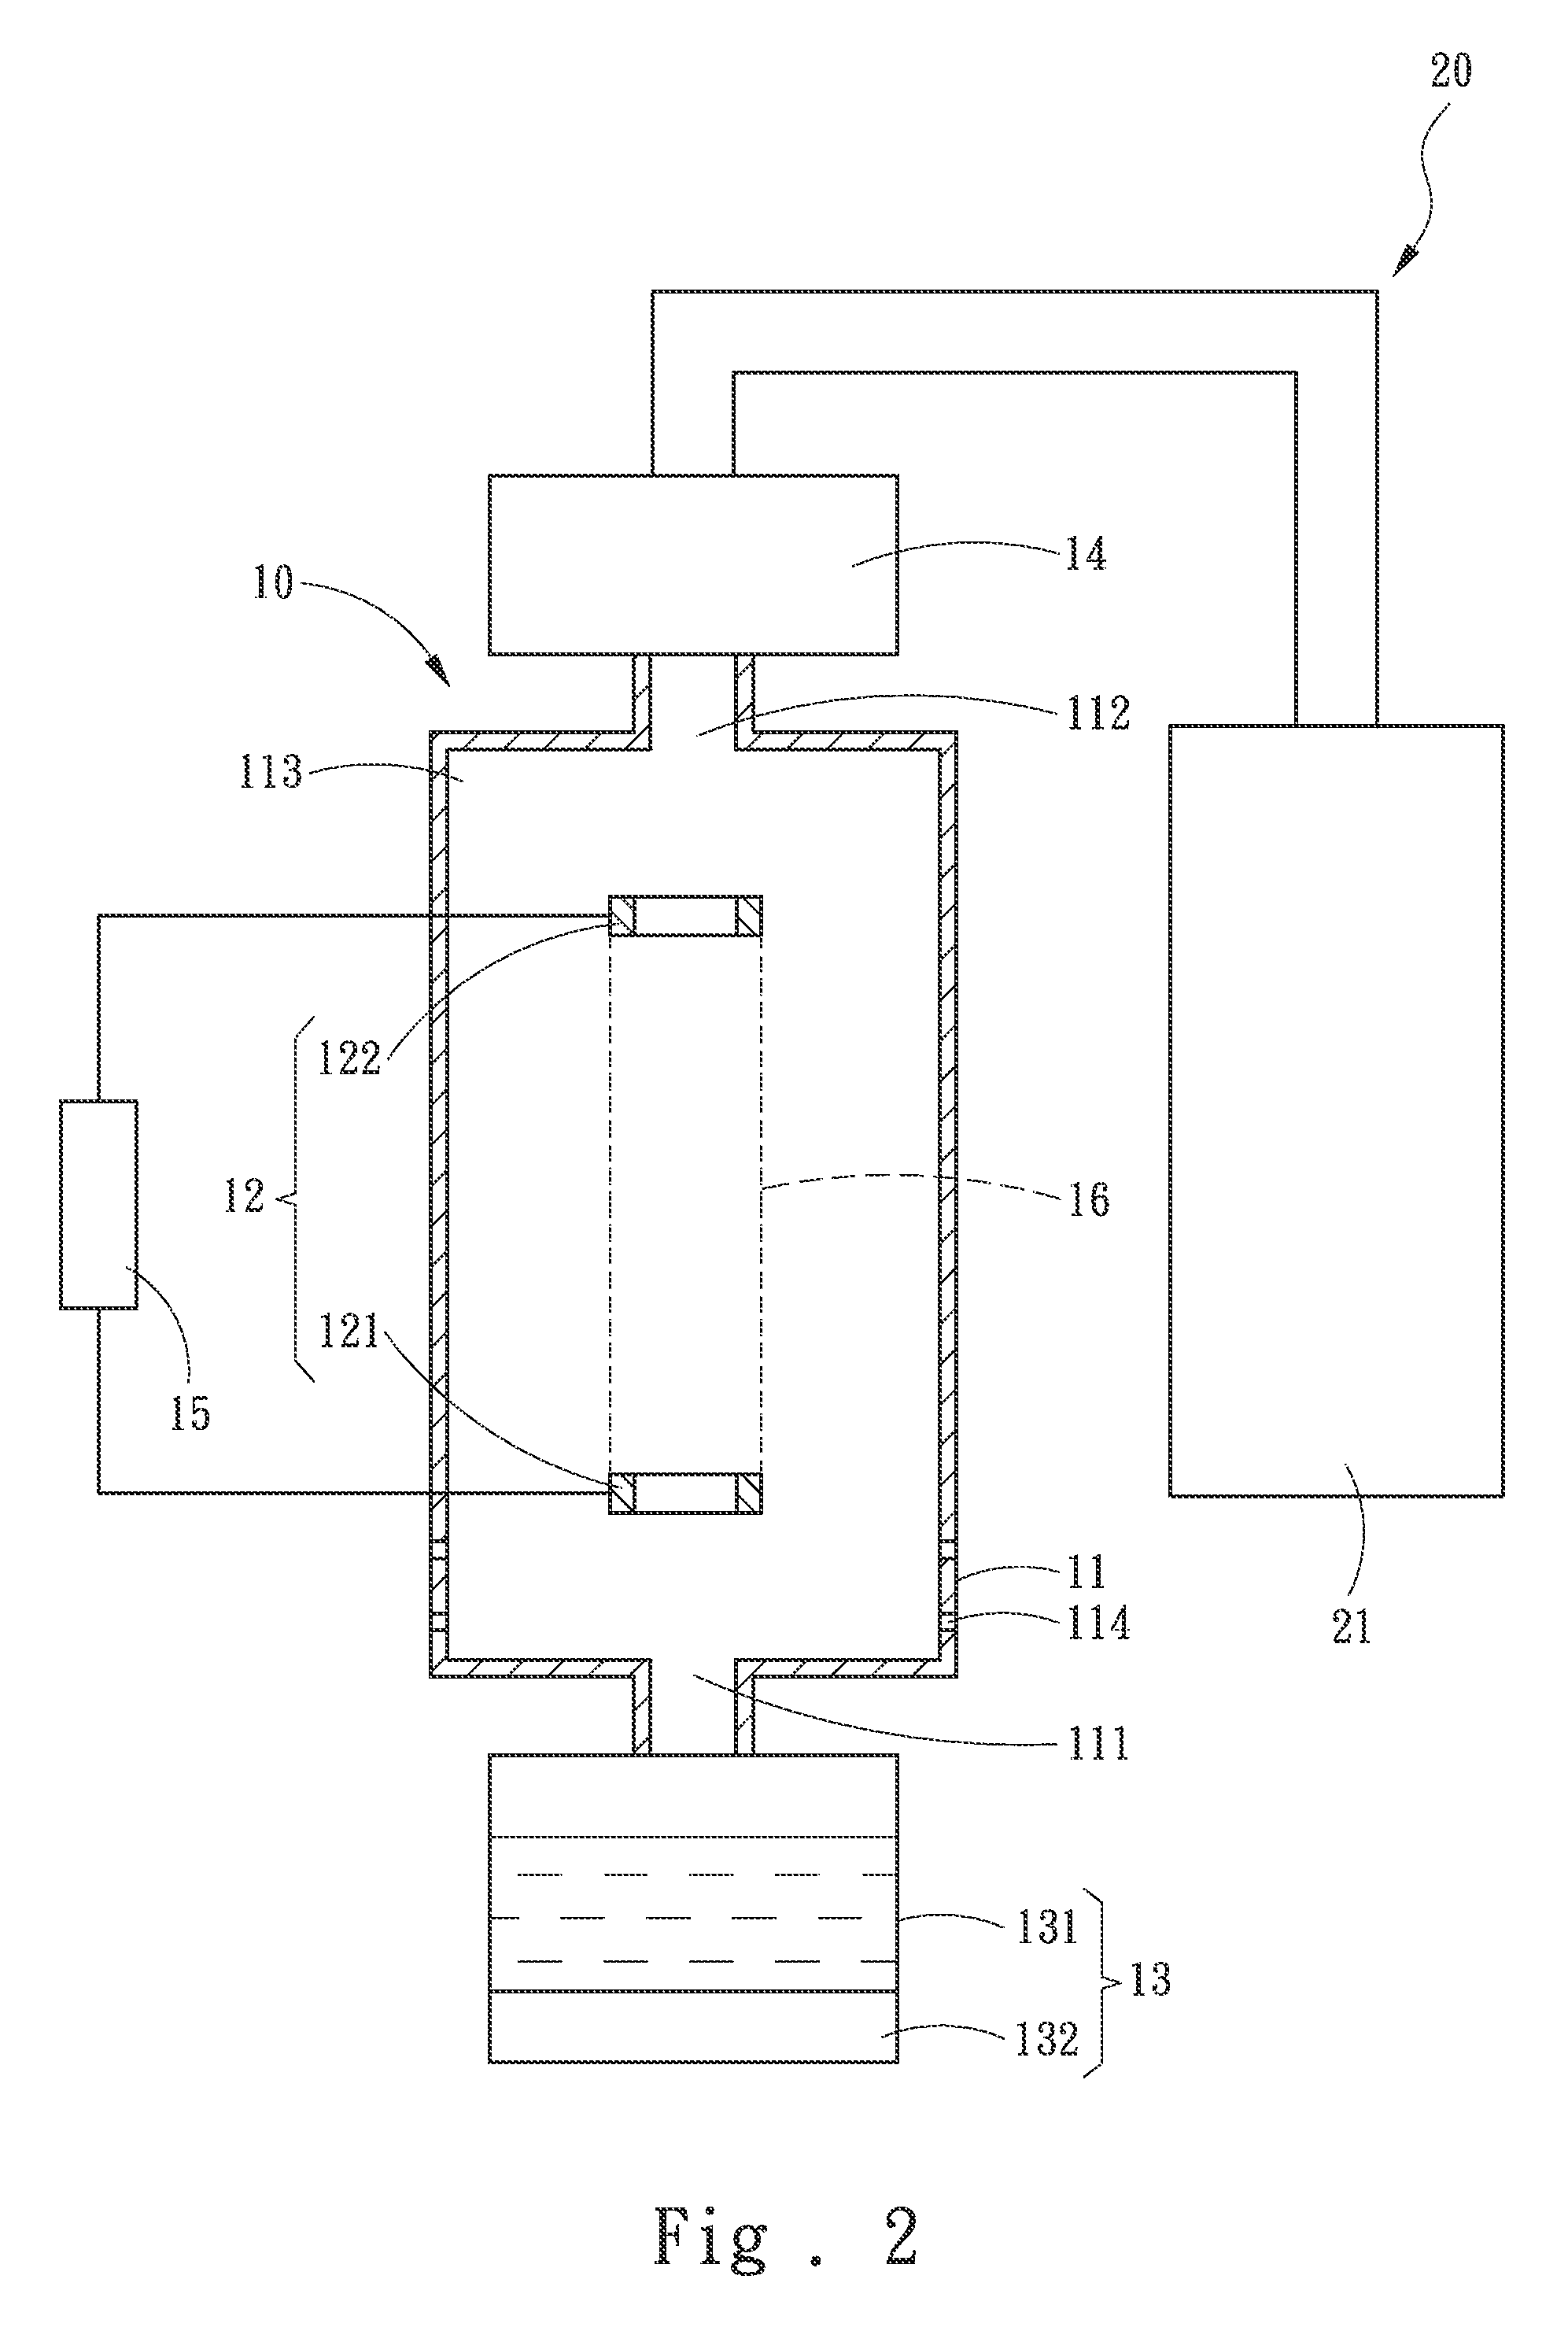 Module applying a hydrogen generating device for supporting combustion of an internal combustion engine